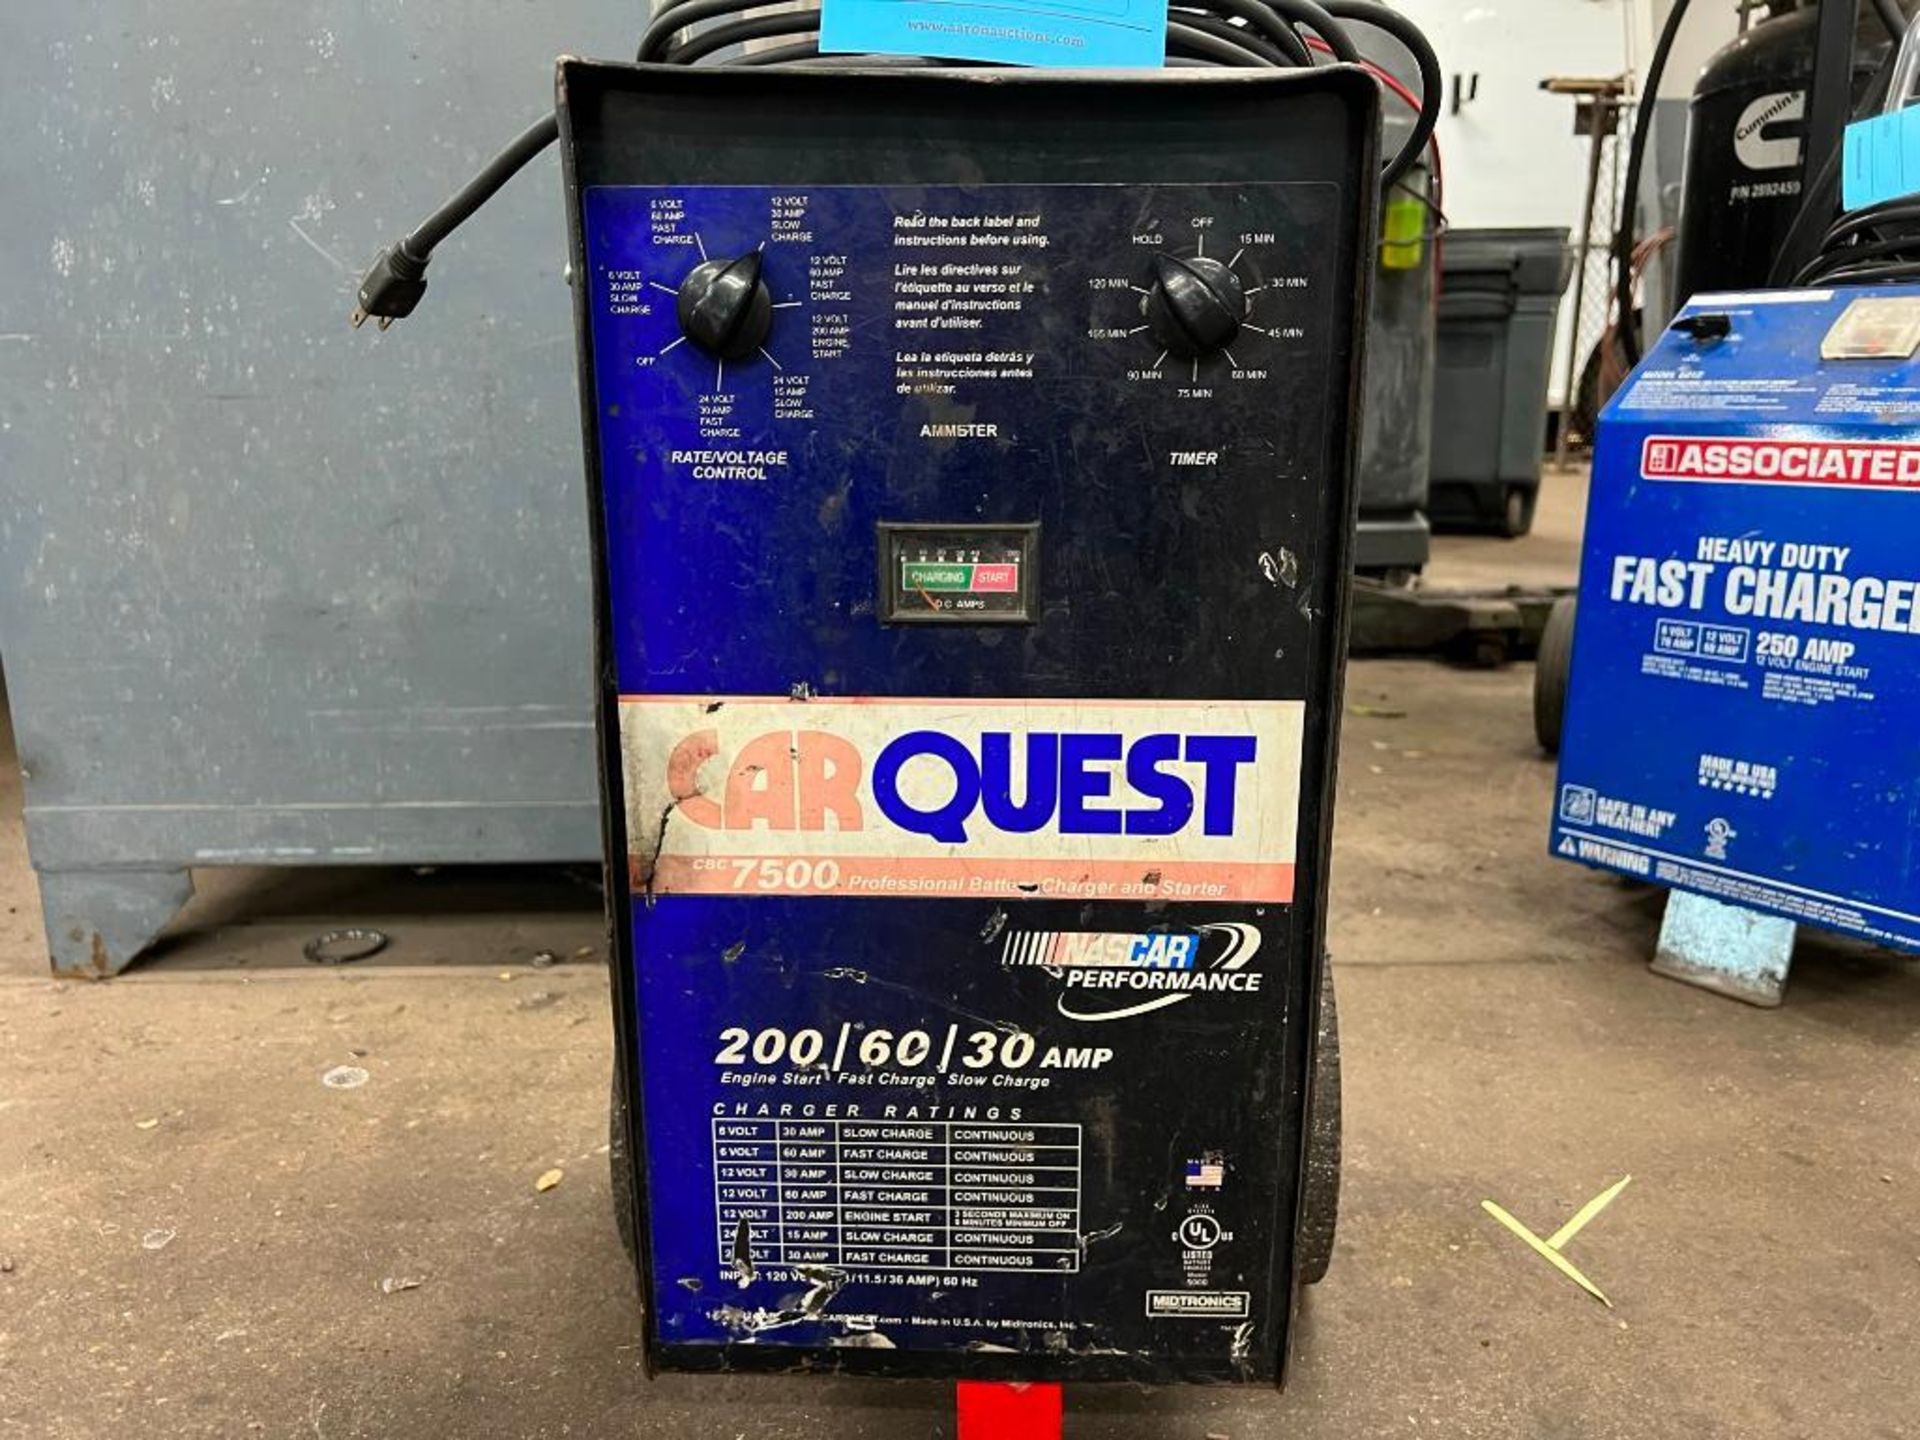 Car Quest Professional Battery Charger and Starter, model 7500 - Image 5 of 6